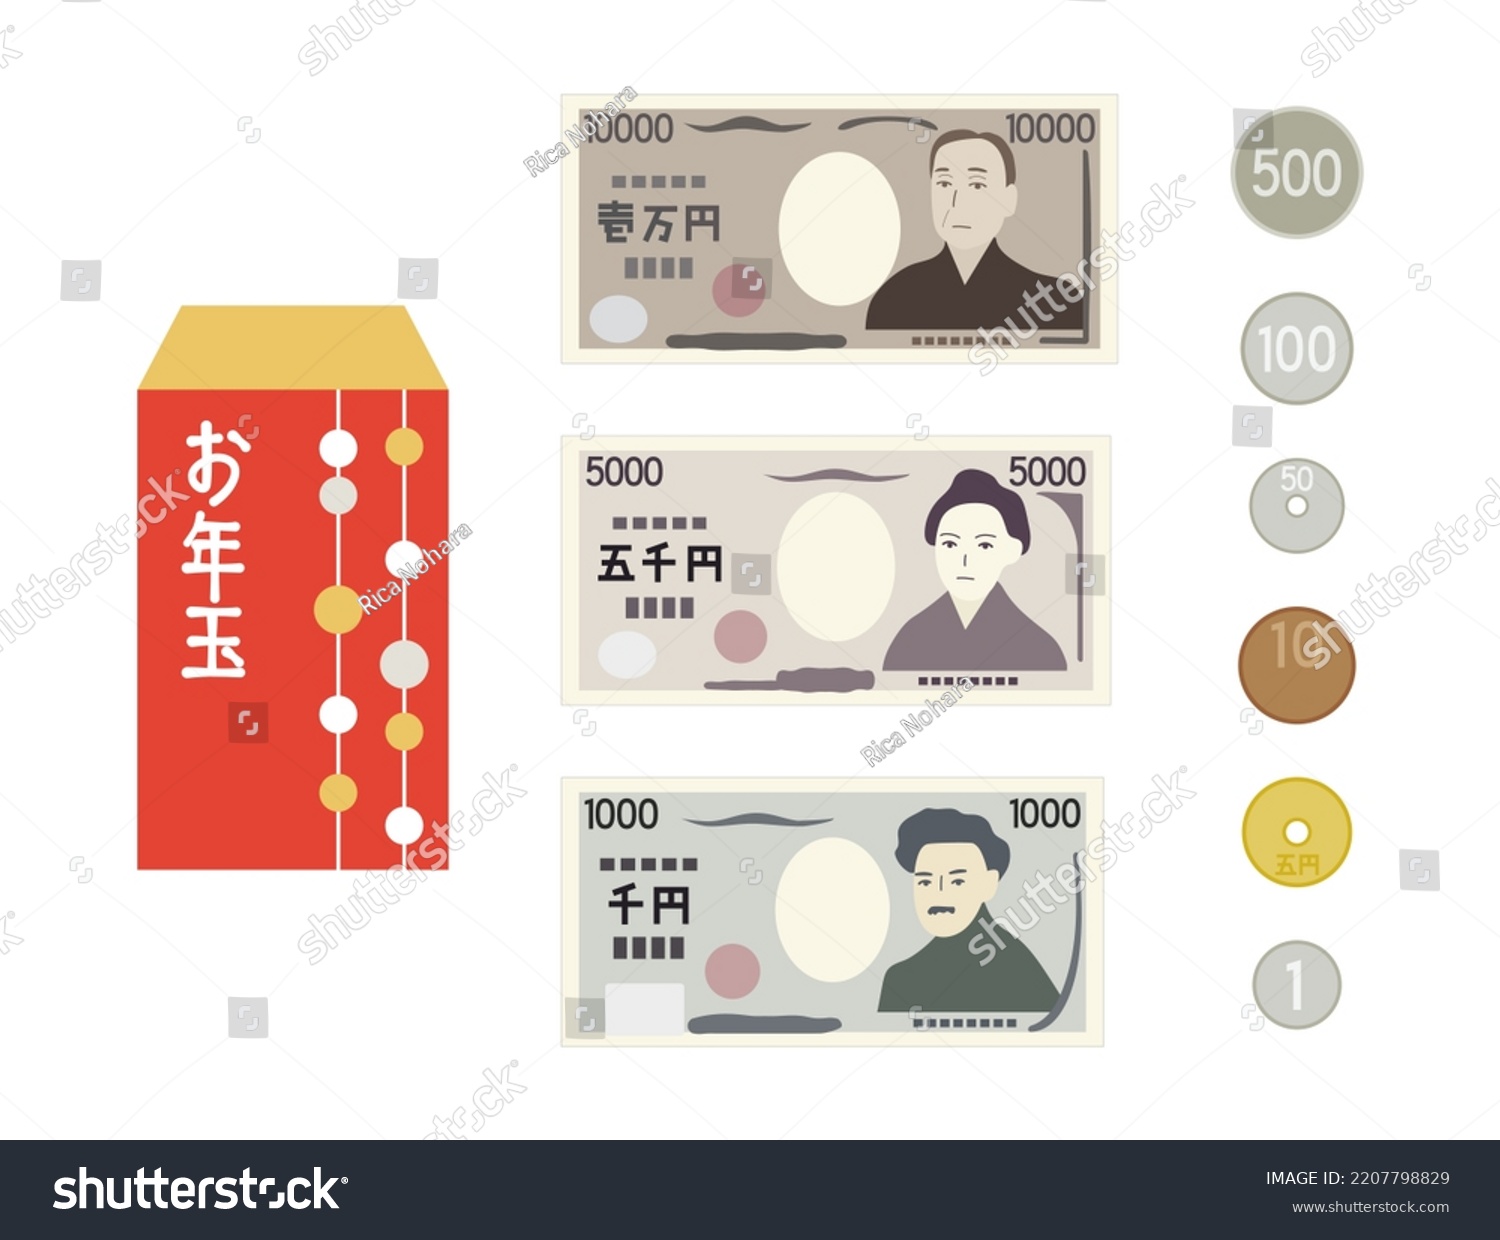 SVG of It is an illustration of Japanese money and a bag to put money in. The text on the right is the amount of money. The text on the bag means money given to children on New Year's Day. svg